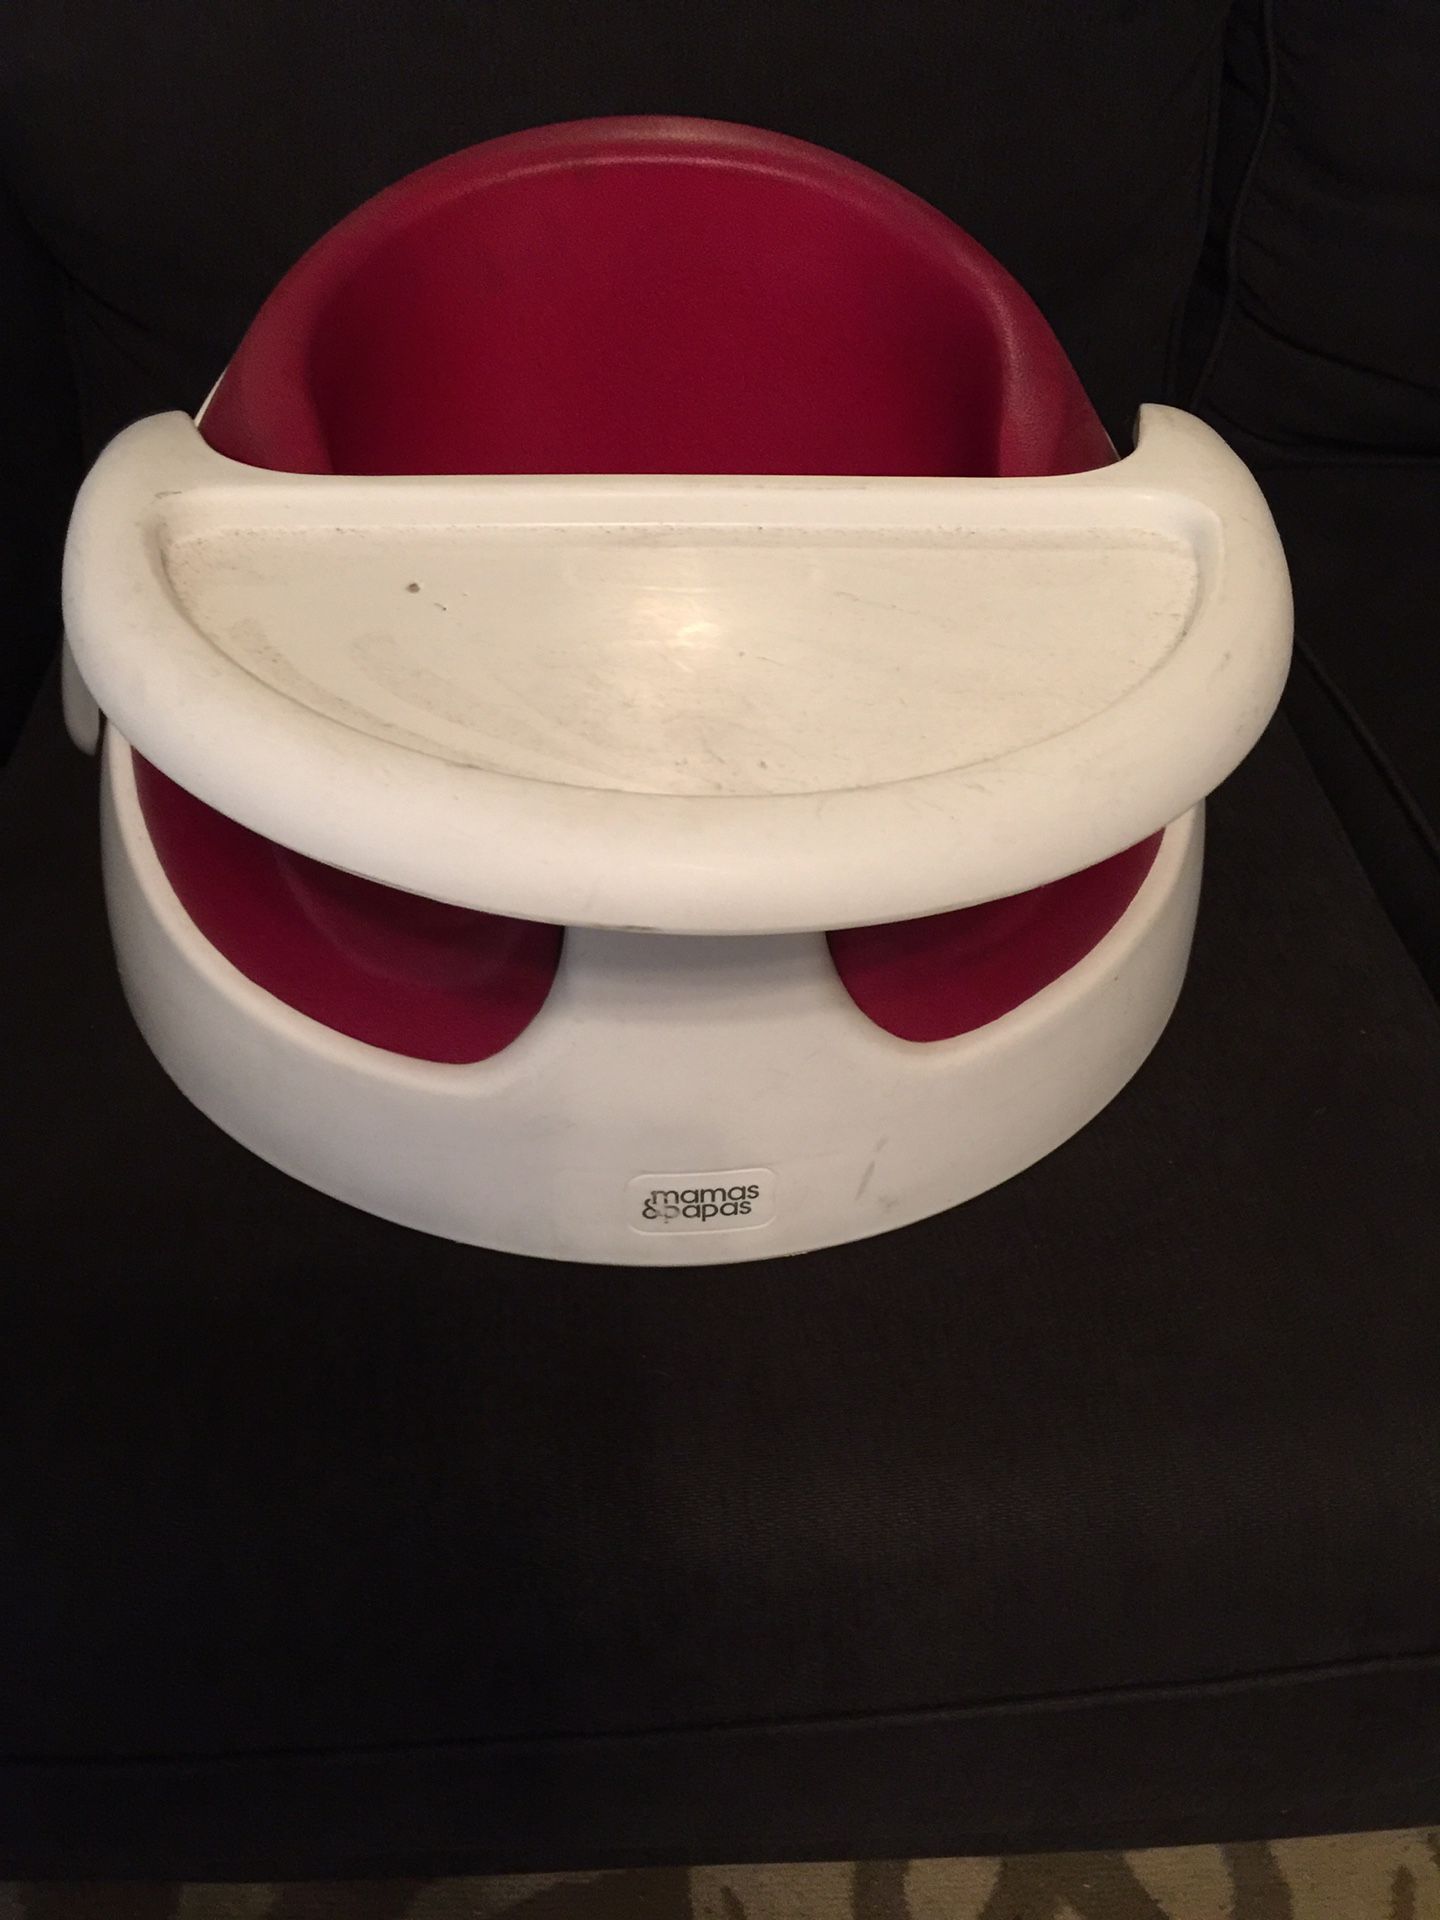 Booster seat $12